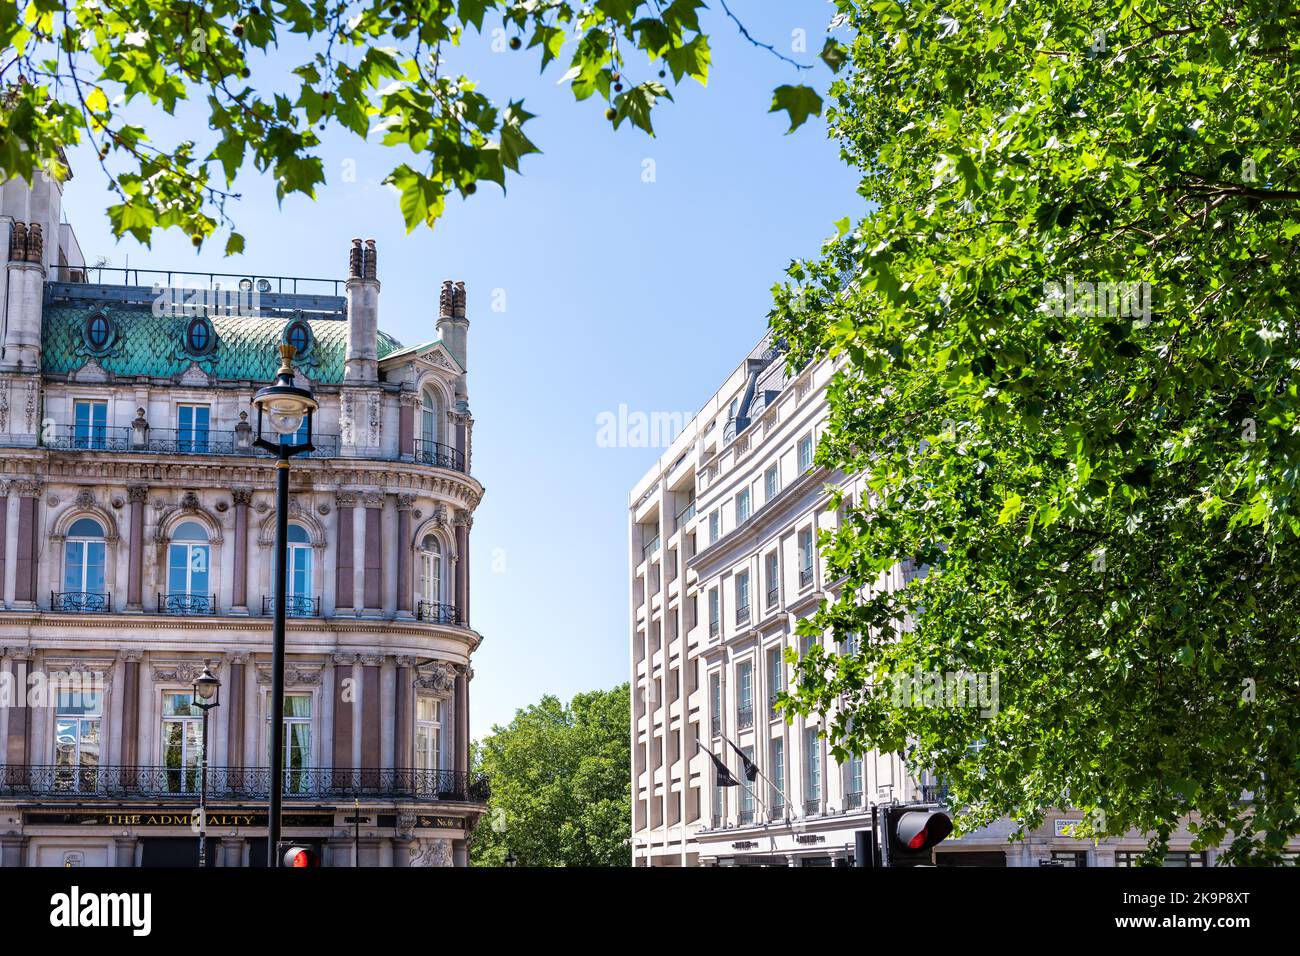 London, United Kingdom - June 22, 2018: Framing view of green trees foliage on Trafalgar square, Cockspur street with Admiralty pub, rooftop hotel Stock Photo